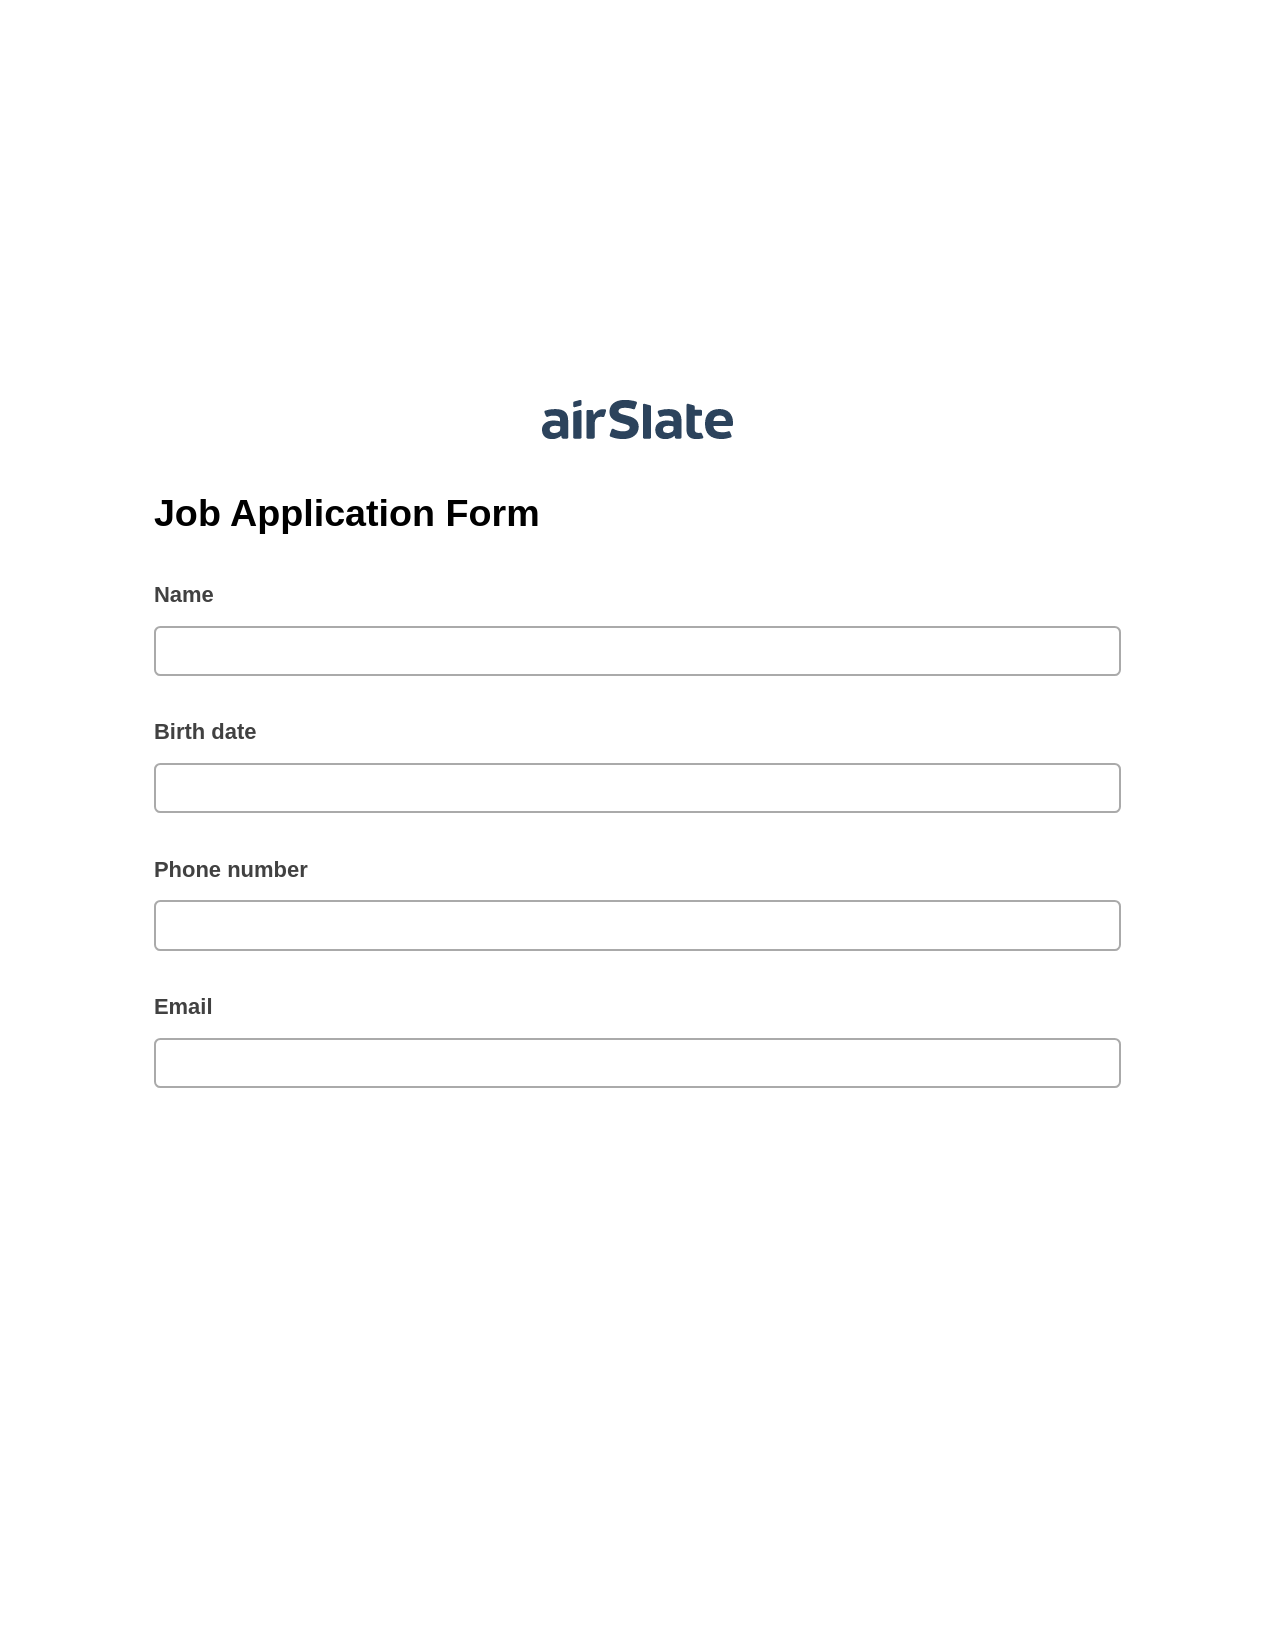 Multirole Job Application Form Pre-fill from CSV File Dropdown Options Bot, System Bot - Create a Slate in another Flow, Export to Google Sheet Bot